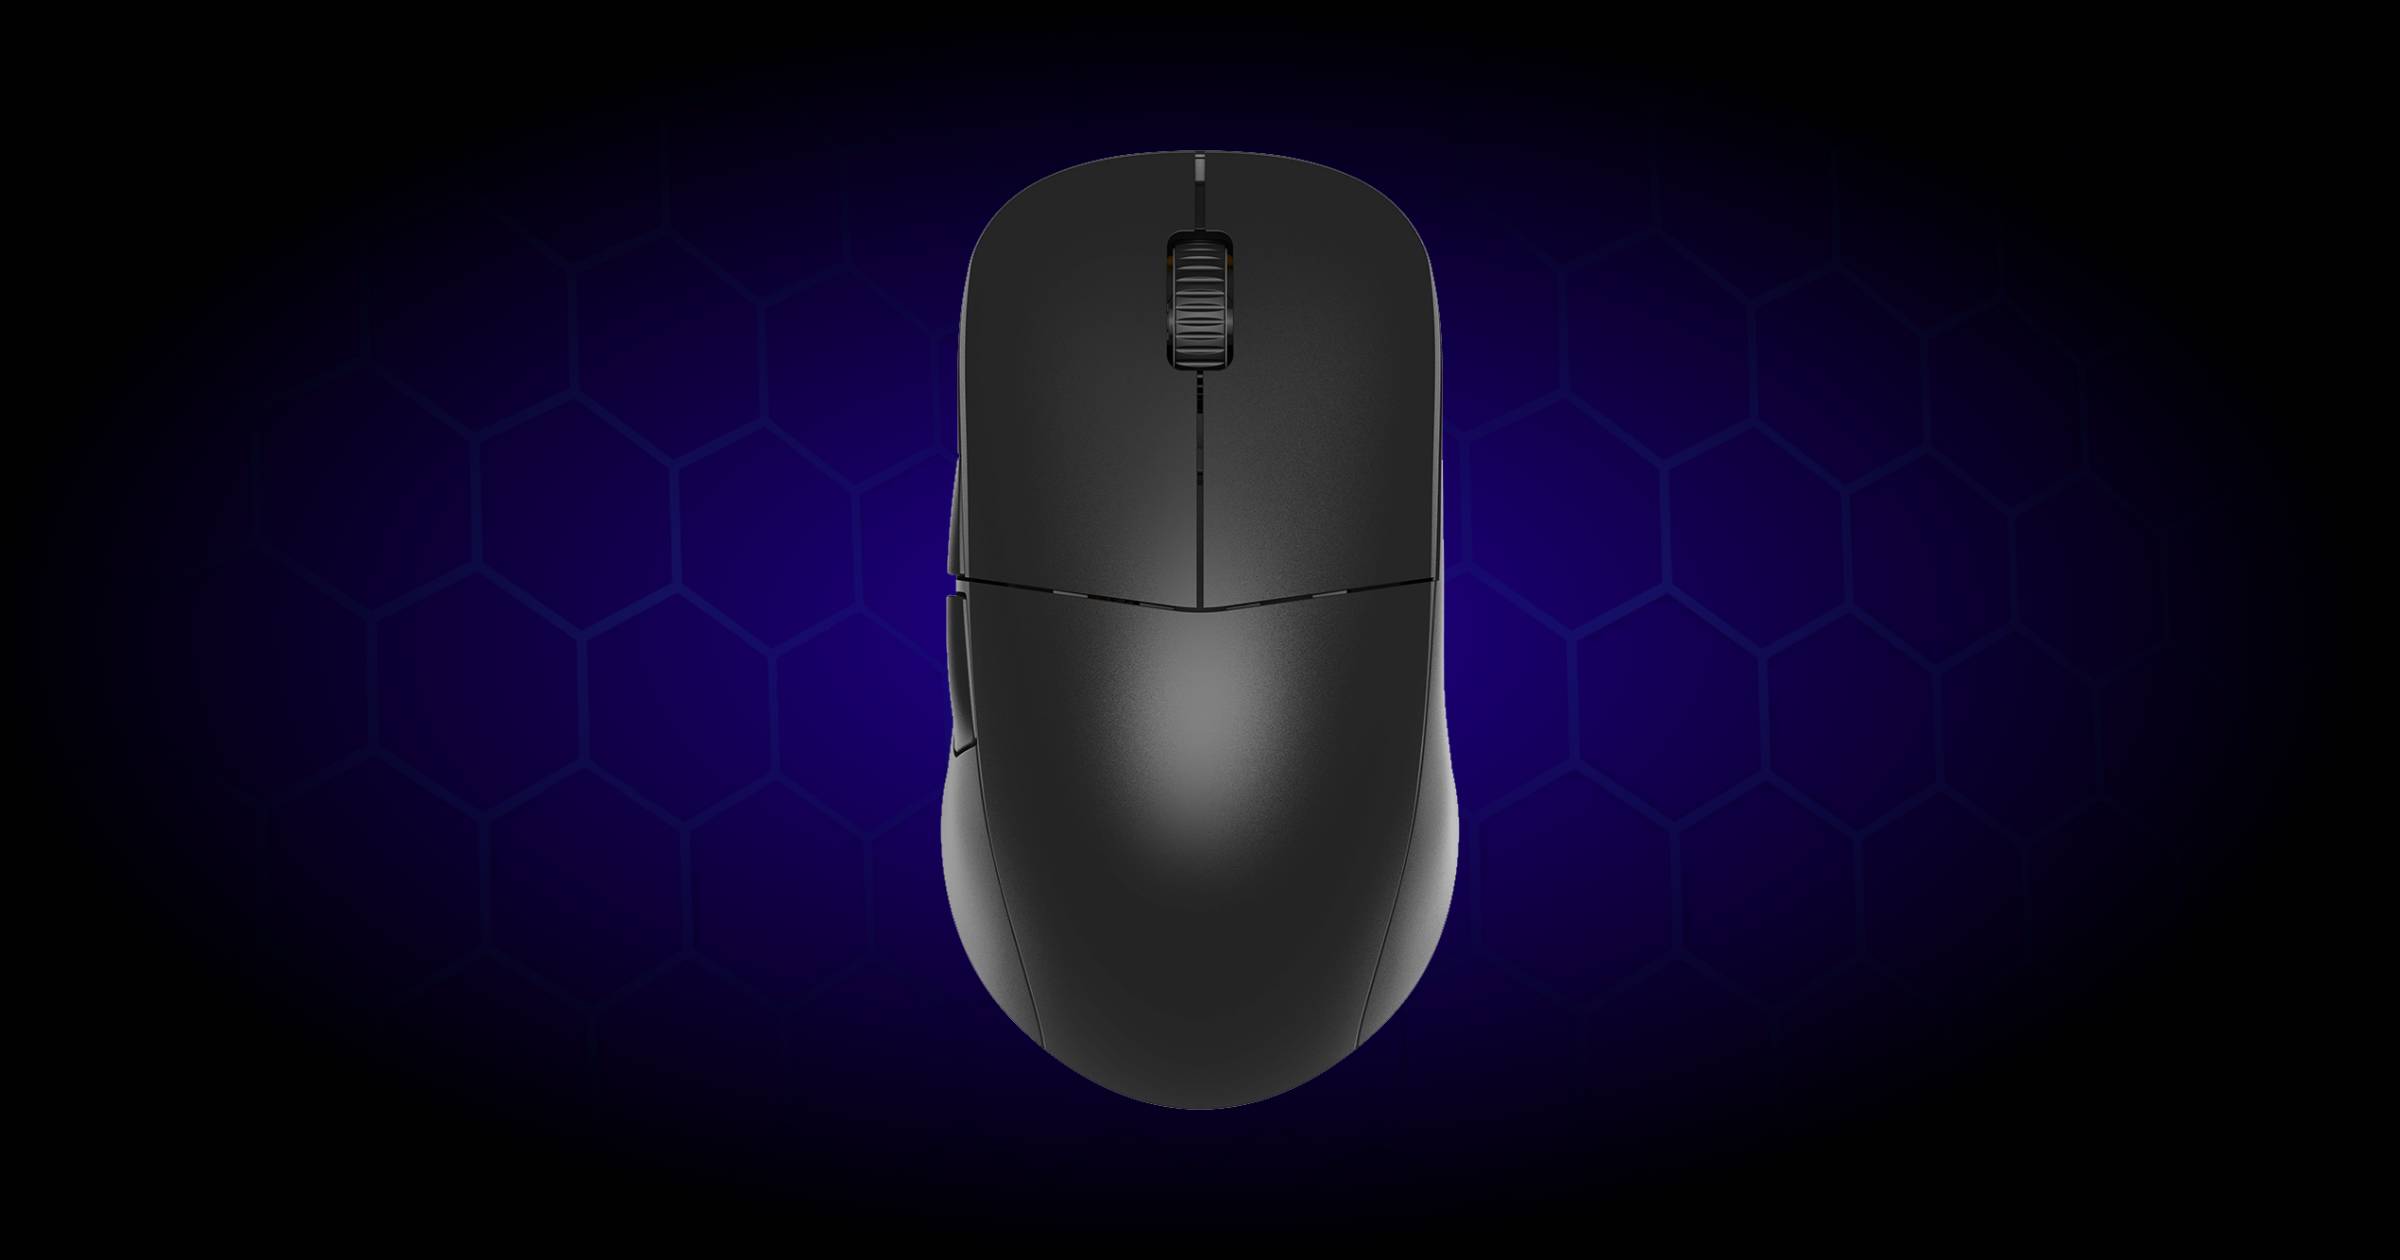 Endgame Gear XM2we Gaming Mouse